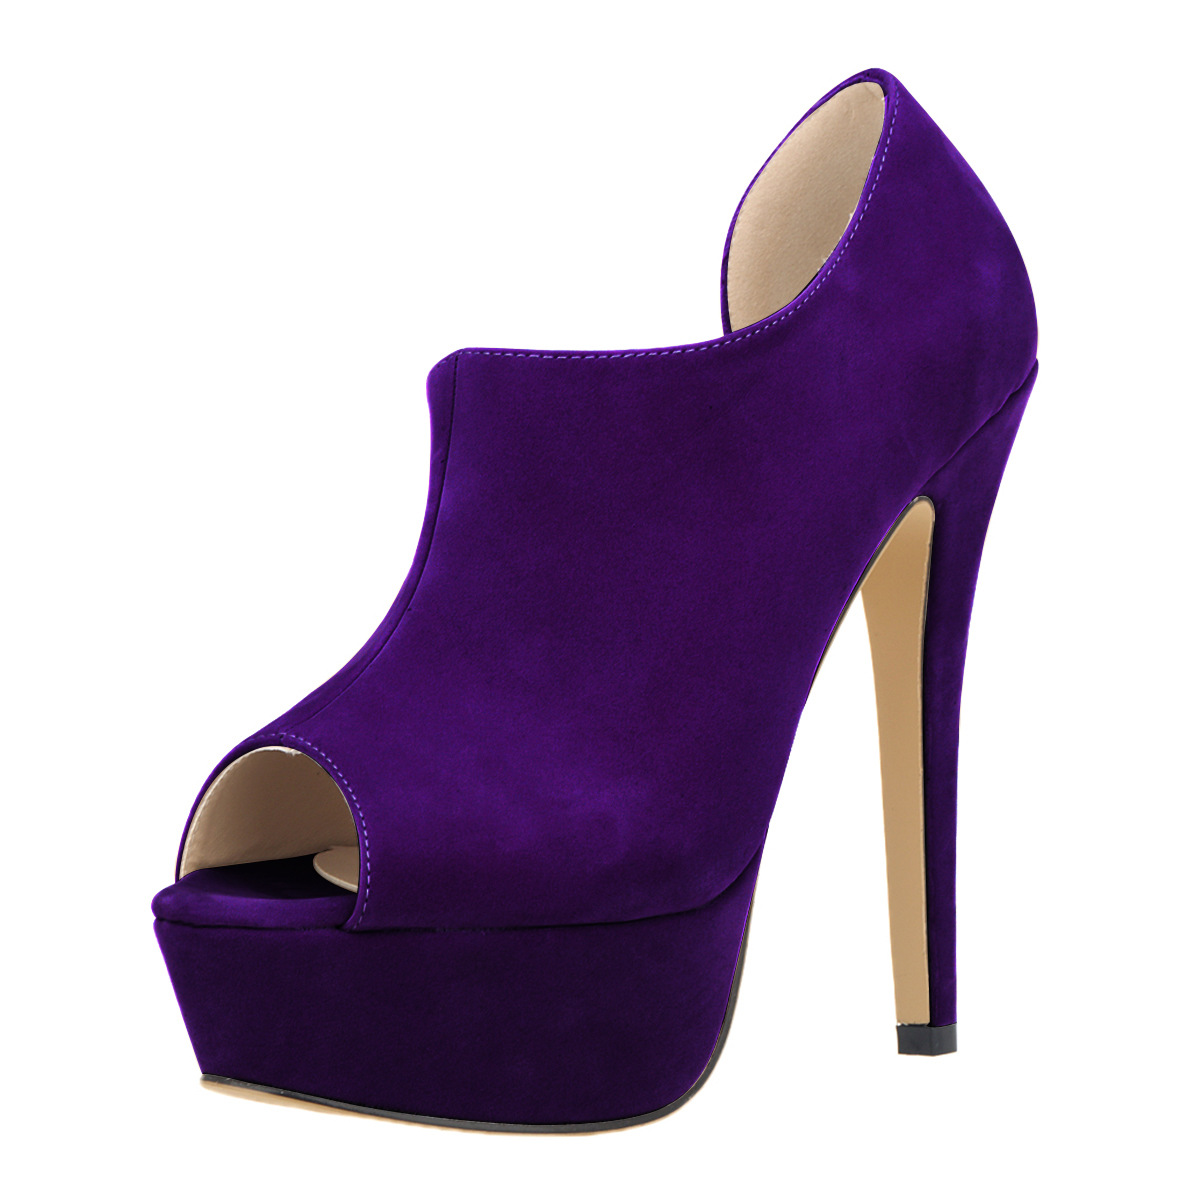 Candy Color Peep Toe Low Cut High Stiletto Heels Prom Shoes